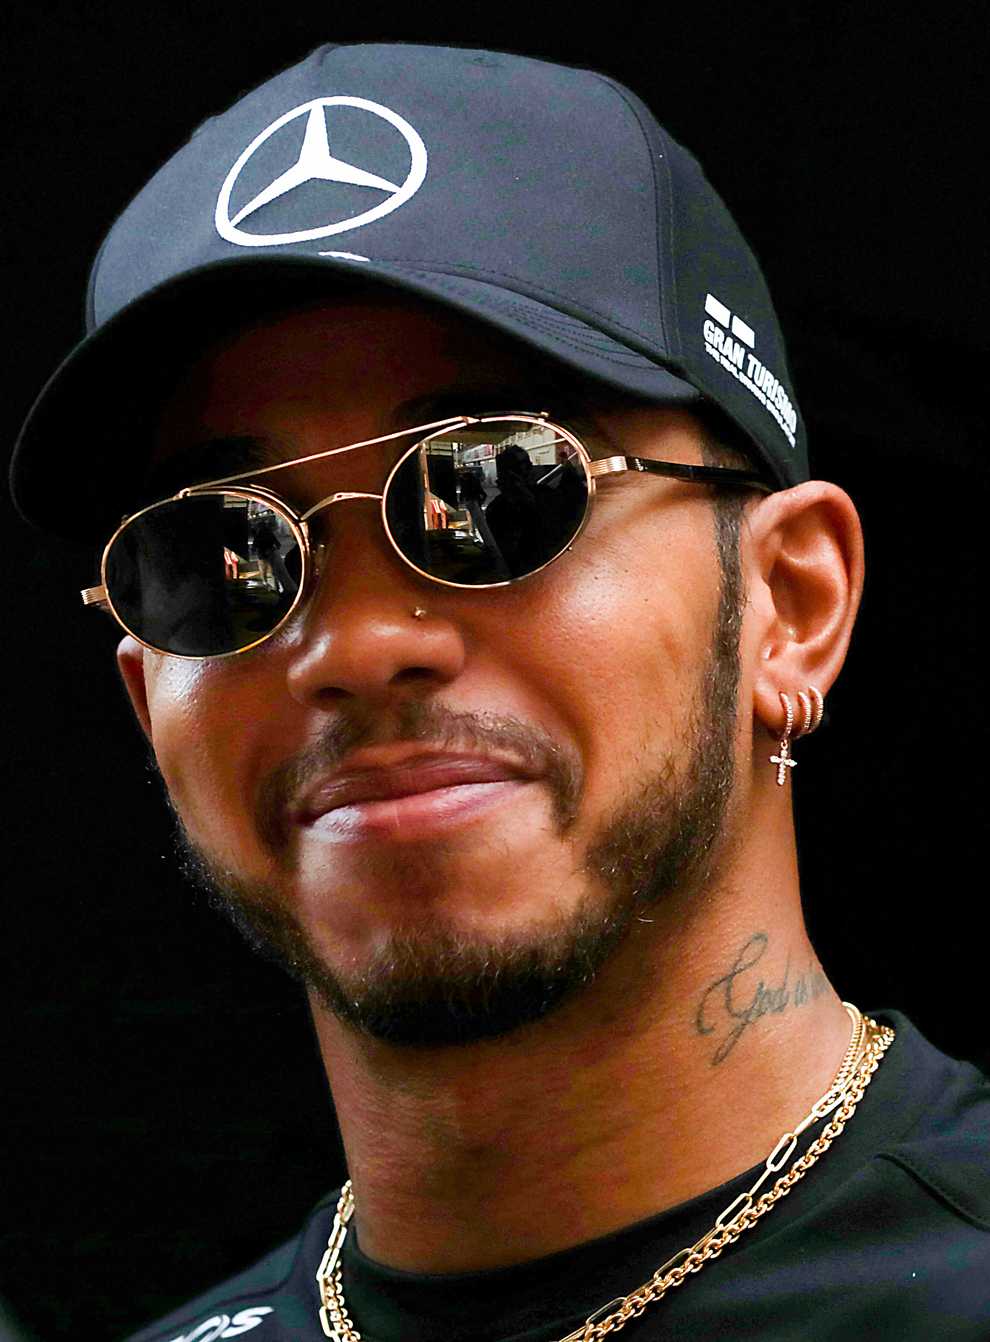 Sir Lewis Hamilton agreed a 12-month contract with Mercedes